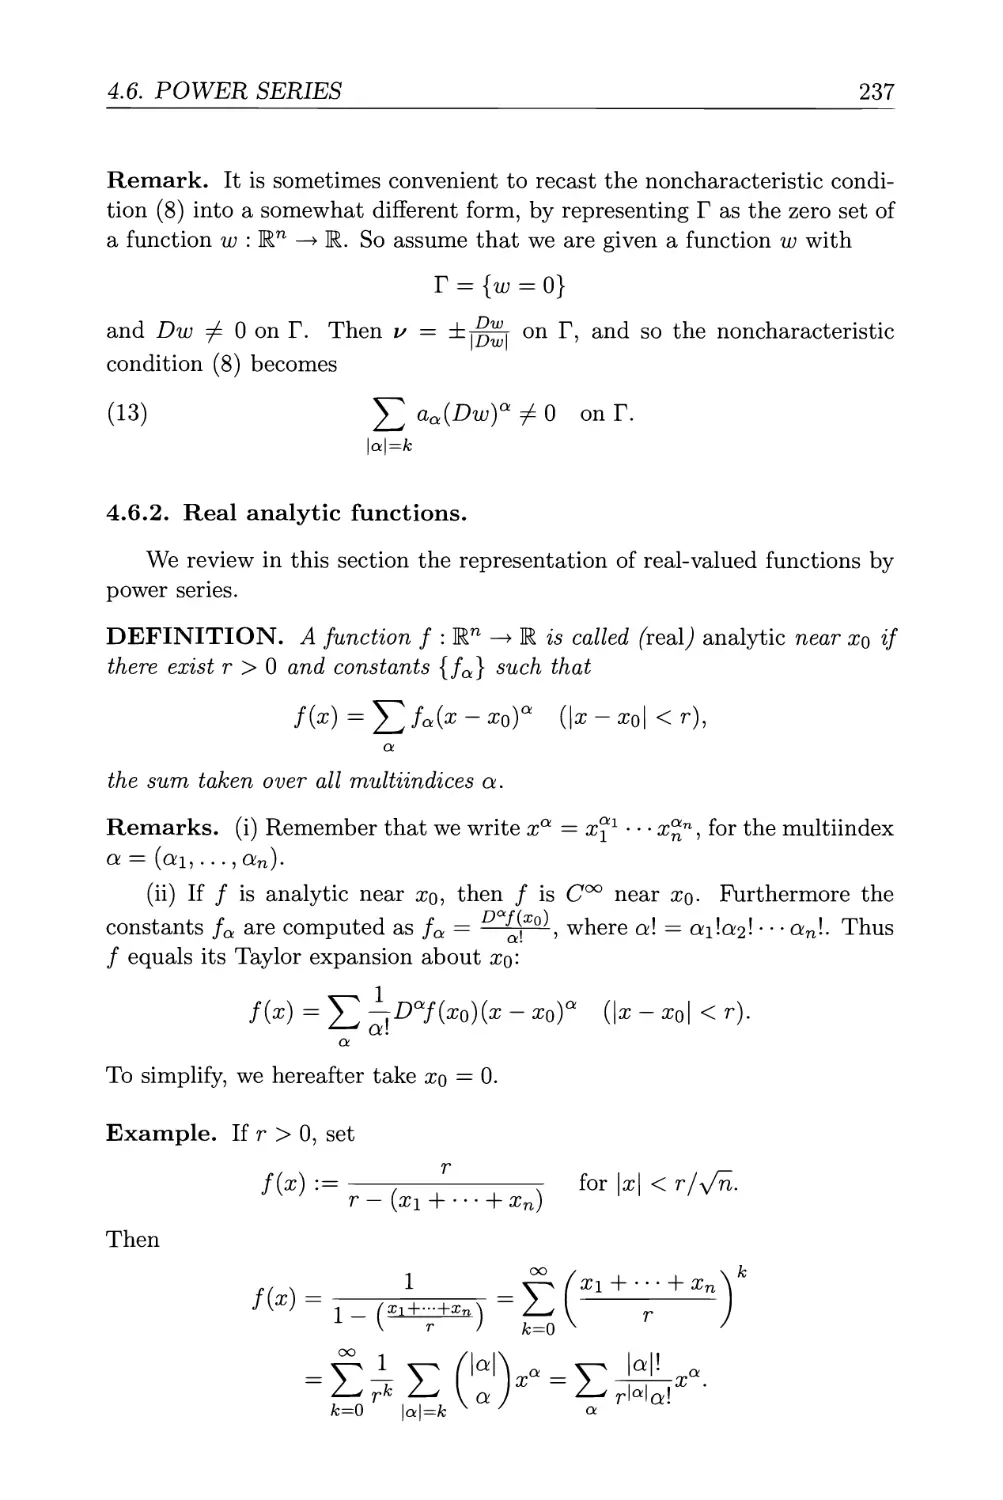 4.6.2. Real analytic functions